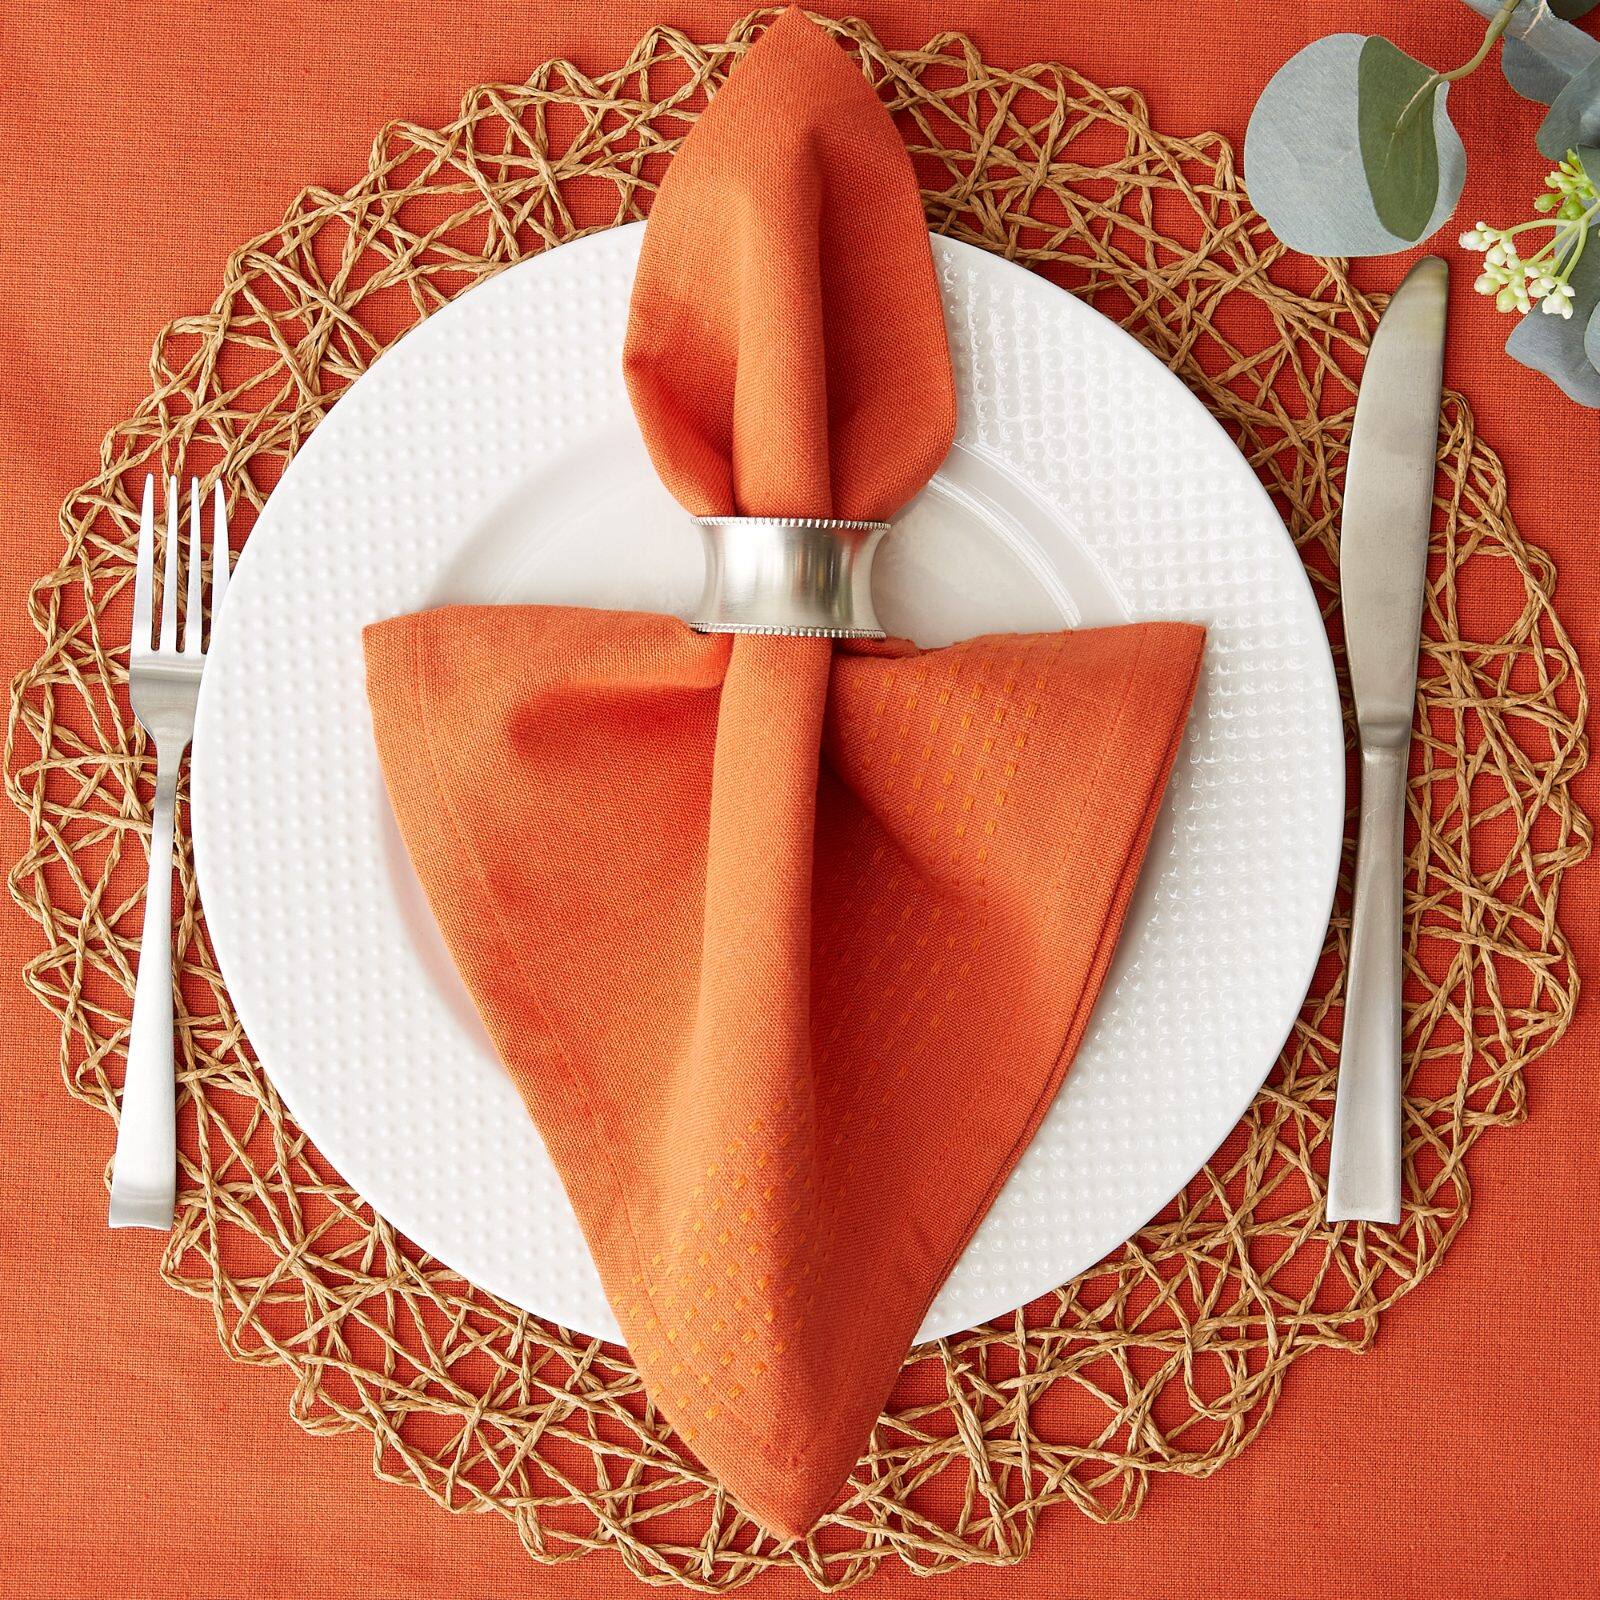 Orange Dinner Cloth Napkins Set of 12, Cotton 18x18 in Reusable and Washable